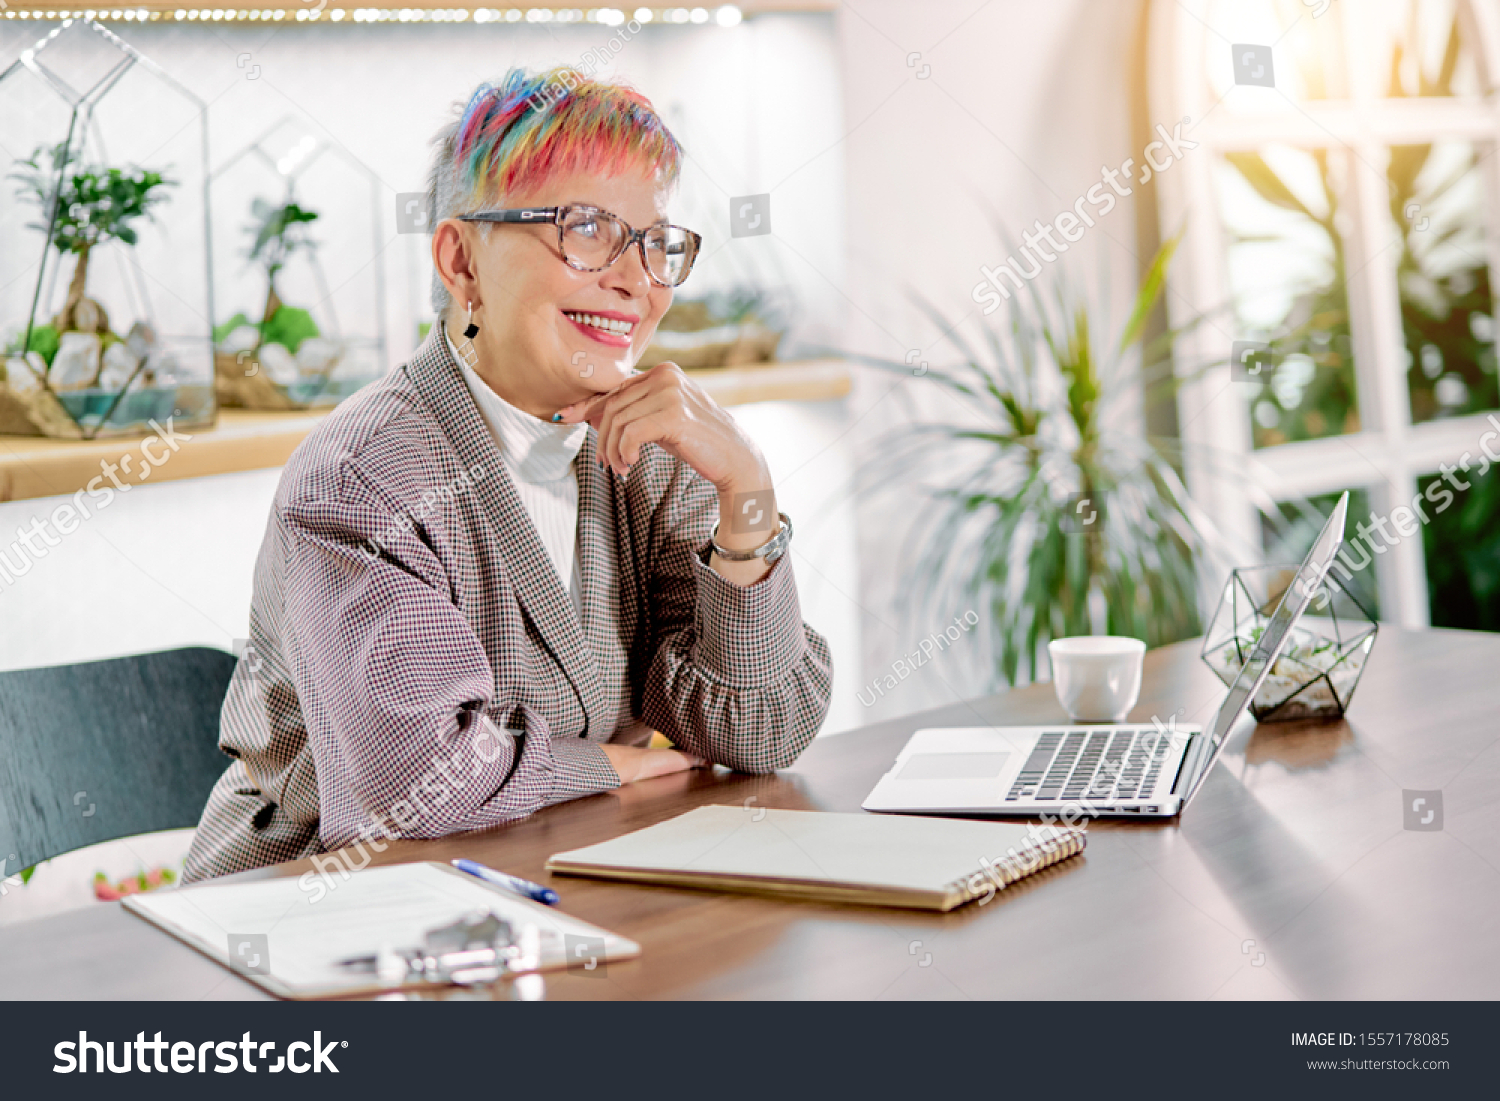 Portrait of well-favoured woman involved in business work smile, wearing blazer, glasses, short colorful hair. Isolated in light office, plants background #1557178085